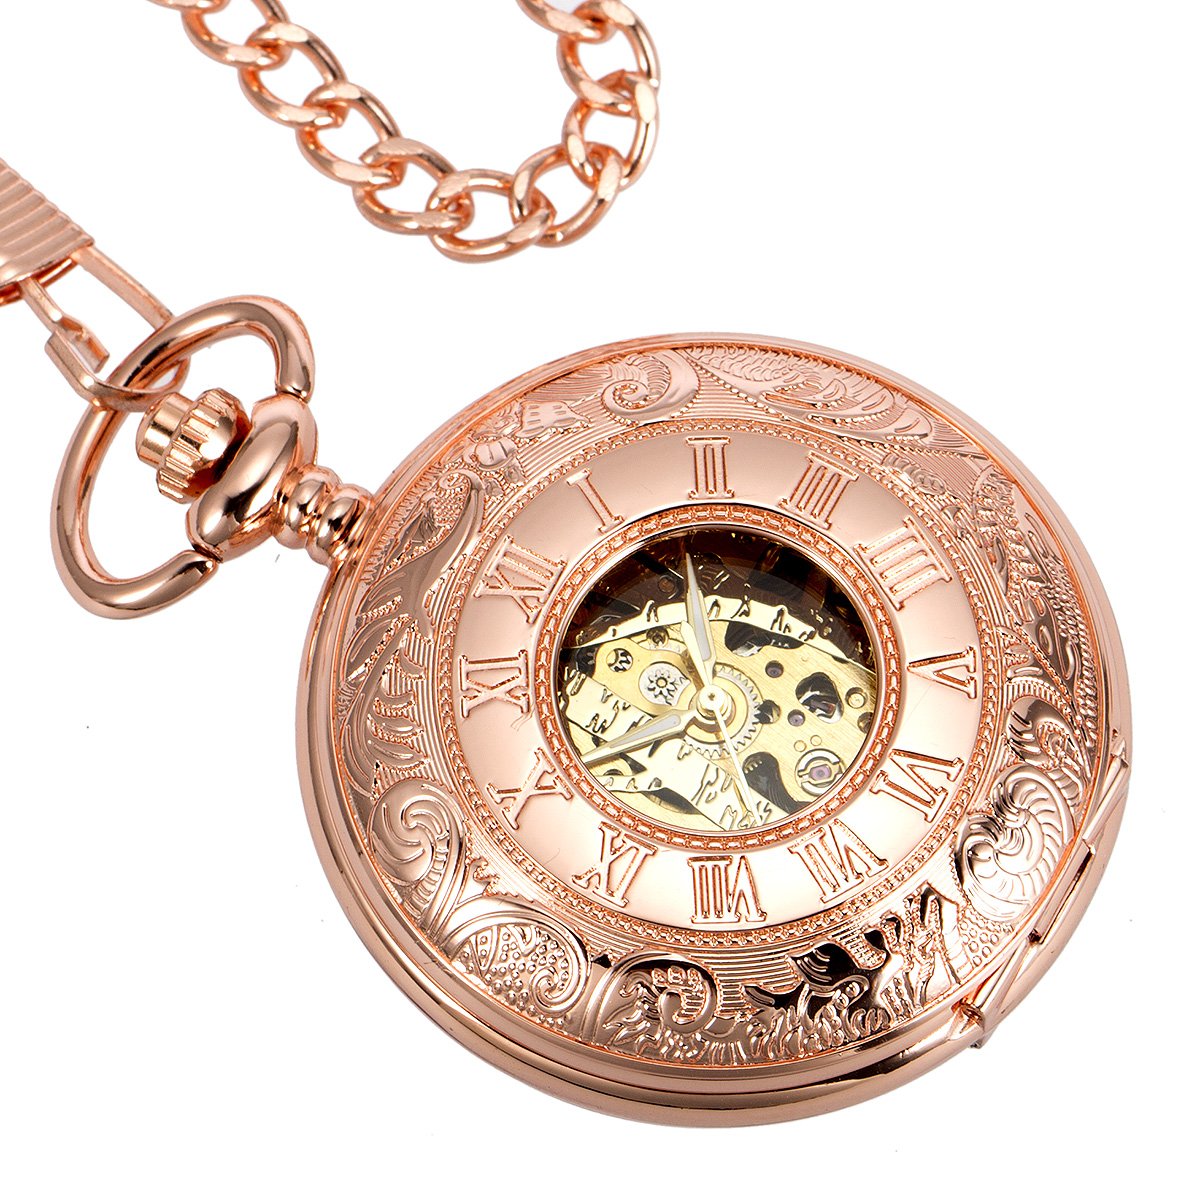 ManChDa Vintage Pocket Watch for Men Mechanical Pocket Watch with Chain Smooth Face Classic Pocket Watch